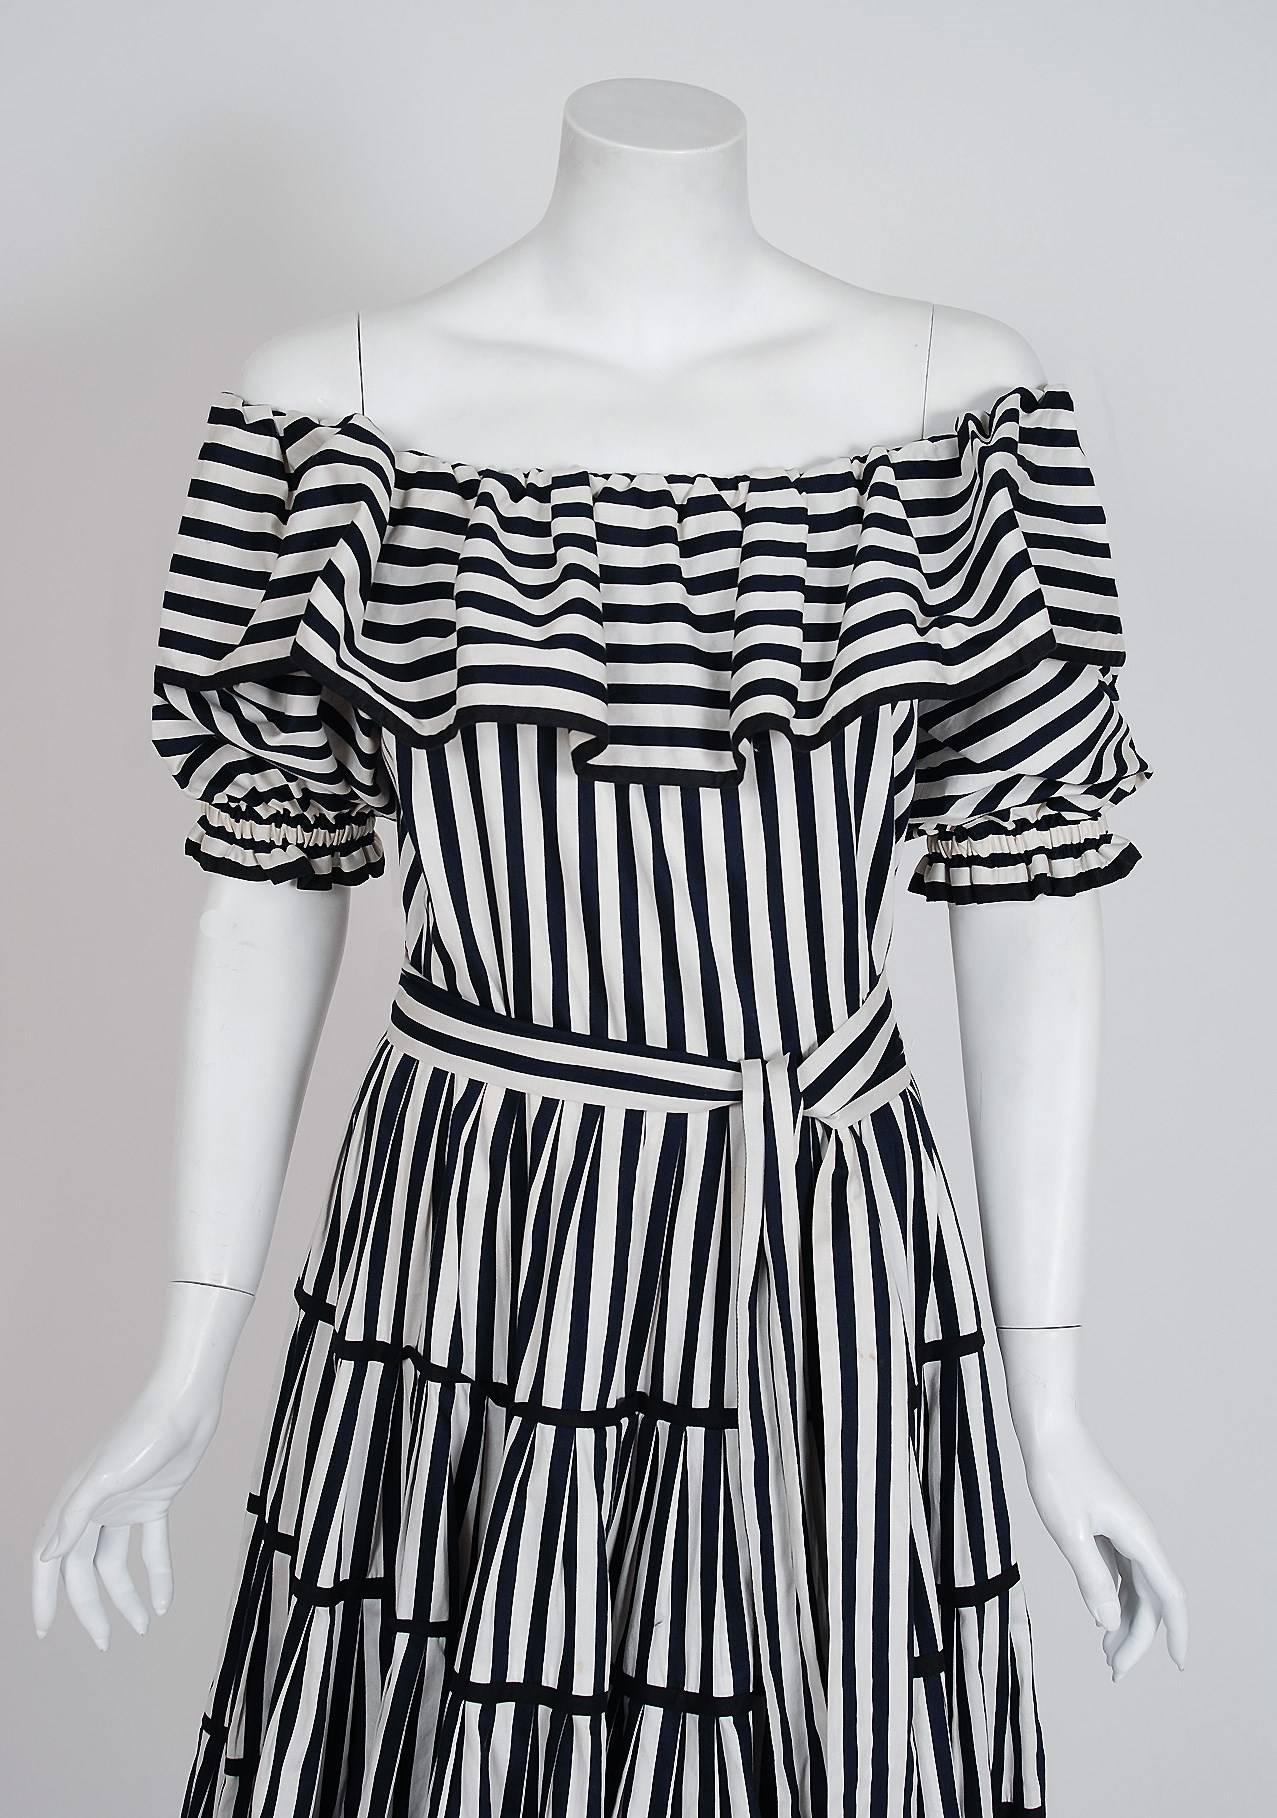 Breathtaking Yves Saint Laurent black and white striped cotton sundress from the infamous Rive Gauche collection during the mid-1970's. Pieces from this decade are very rare and are true examples of fashion history. I adore the low-cut plunge